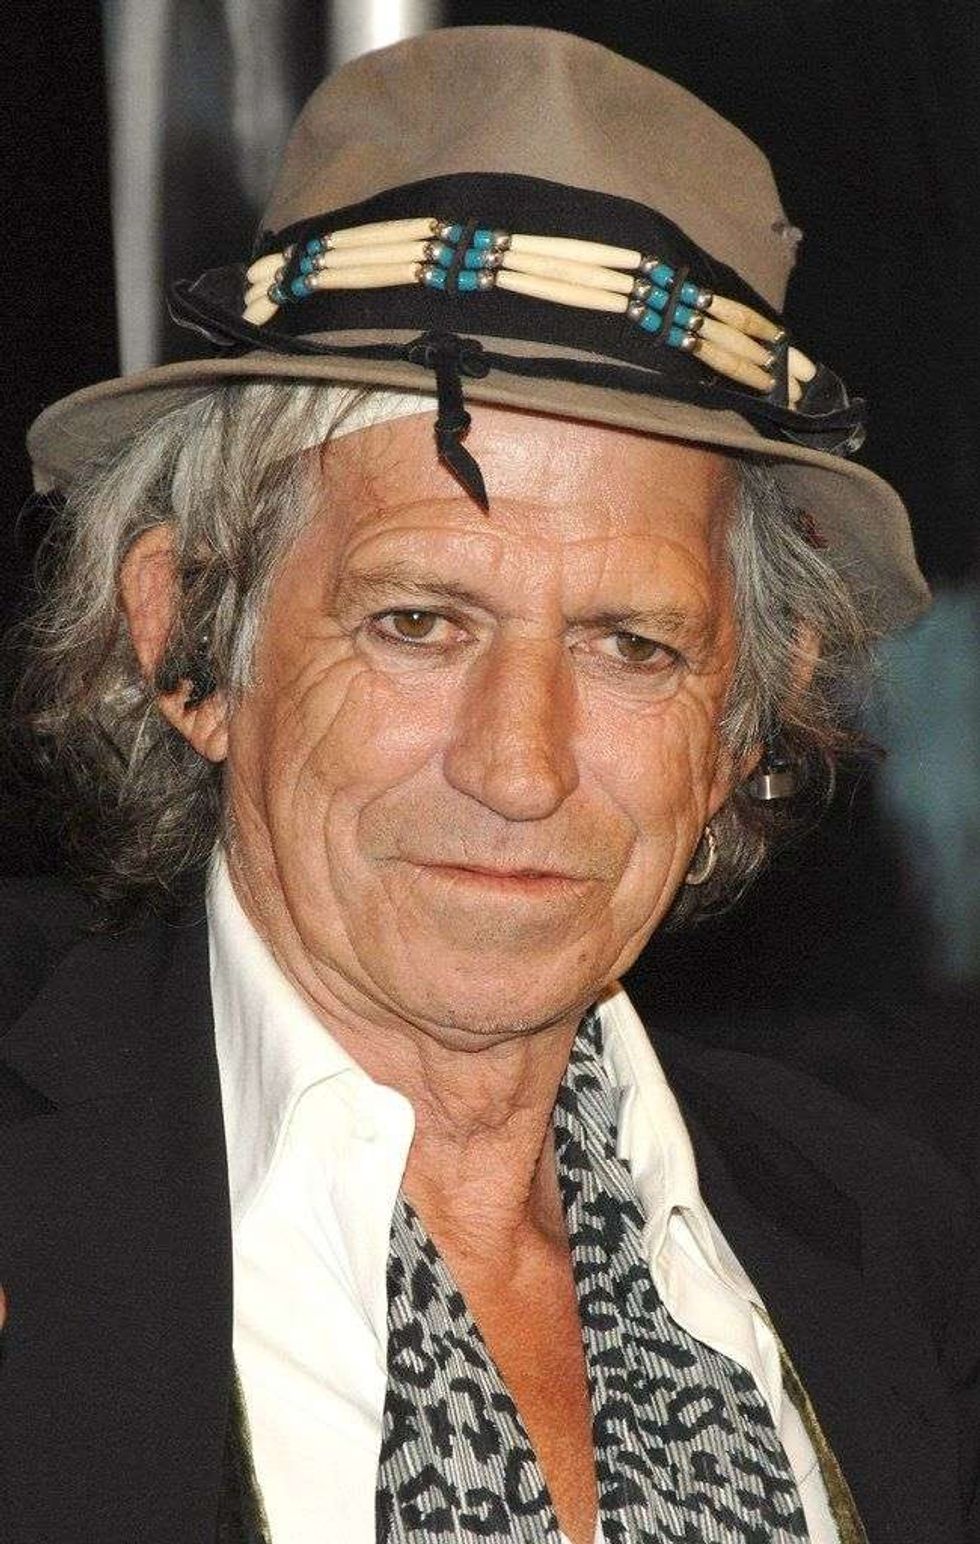 Keith Richards is a singer, songwriter, and record producer, and is considered among the greatest rock n roll musicians of all time.